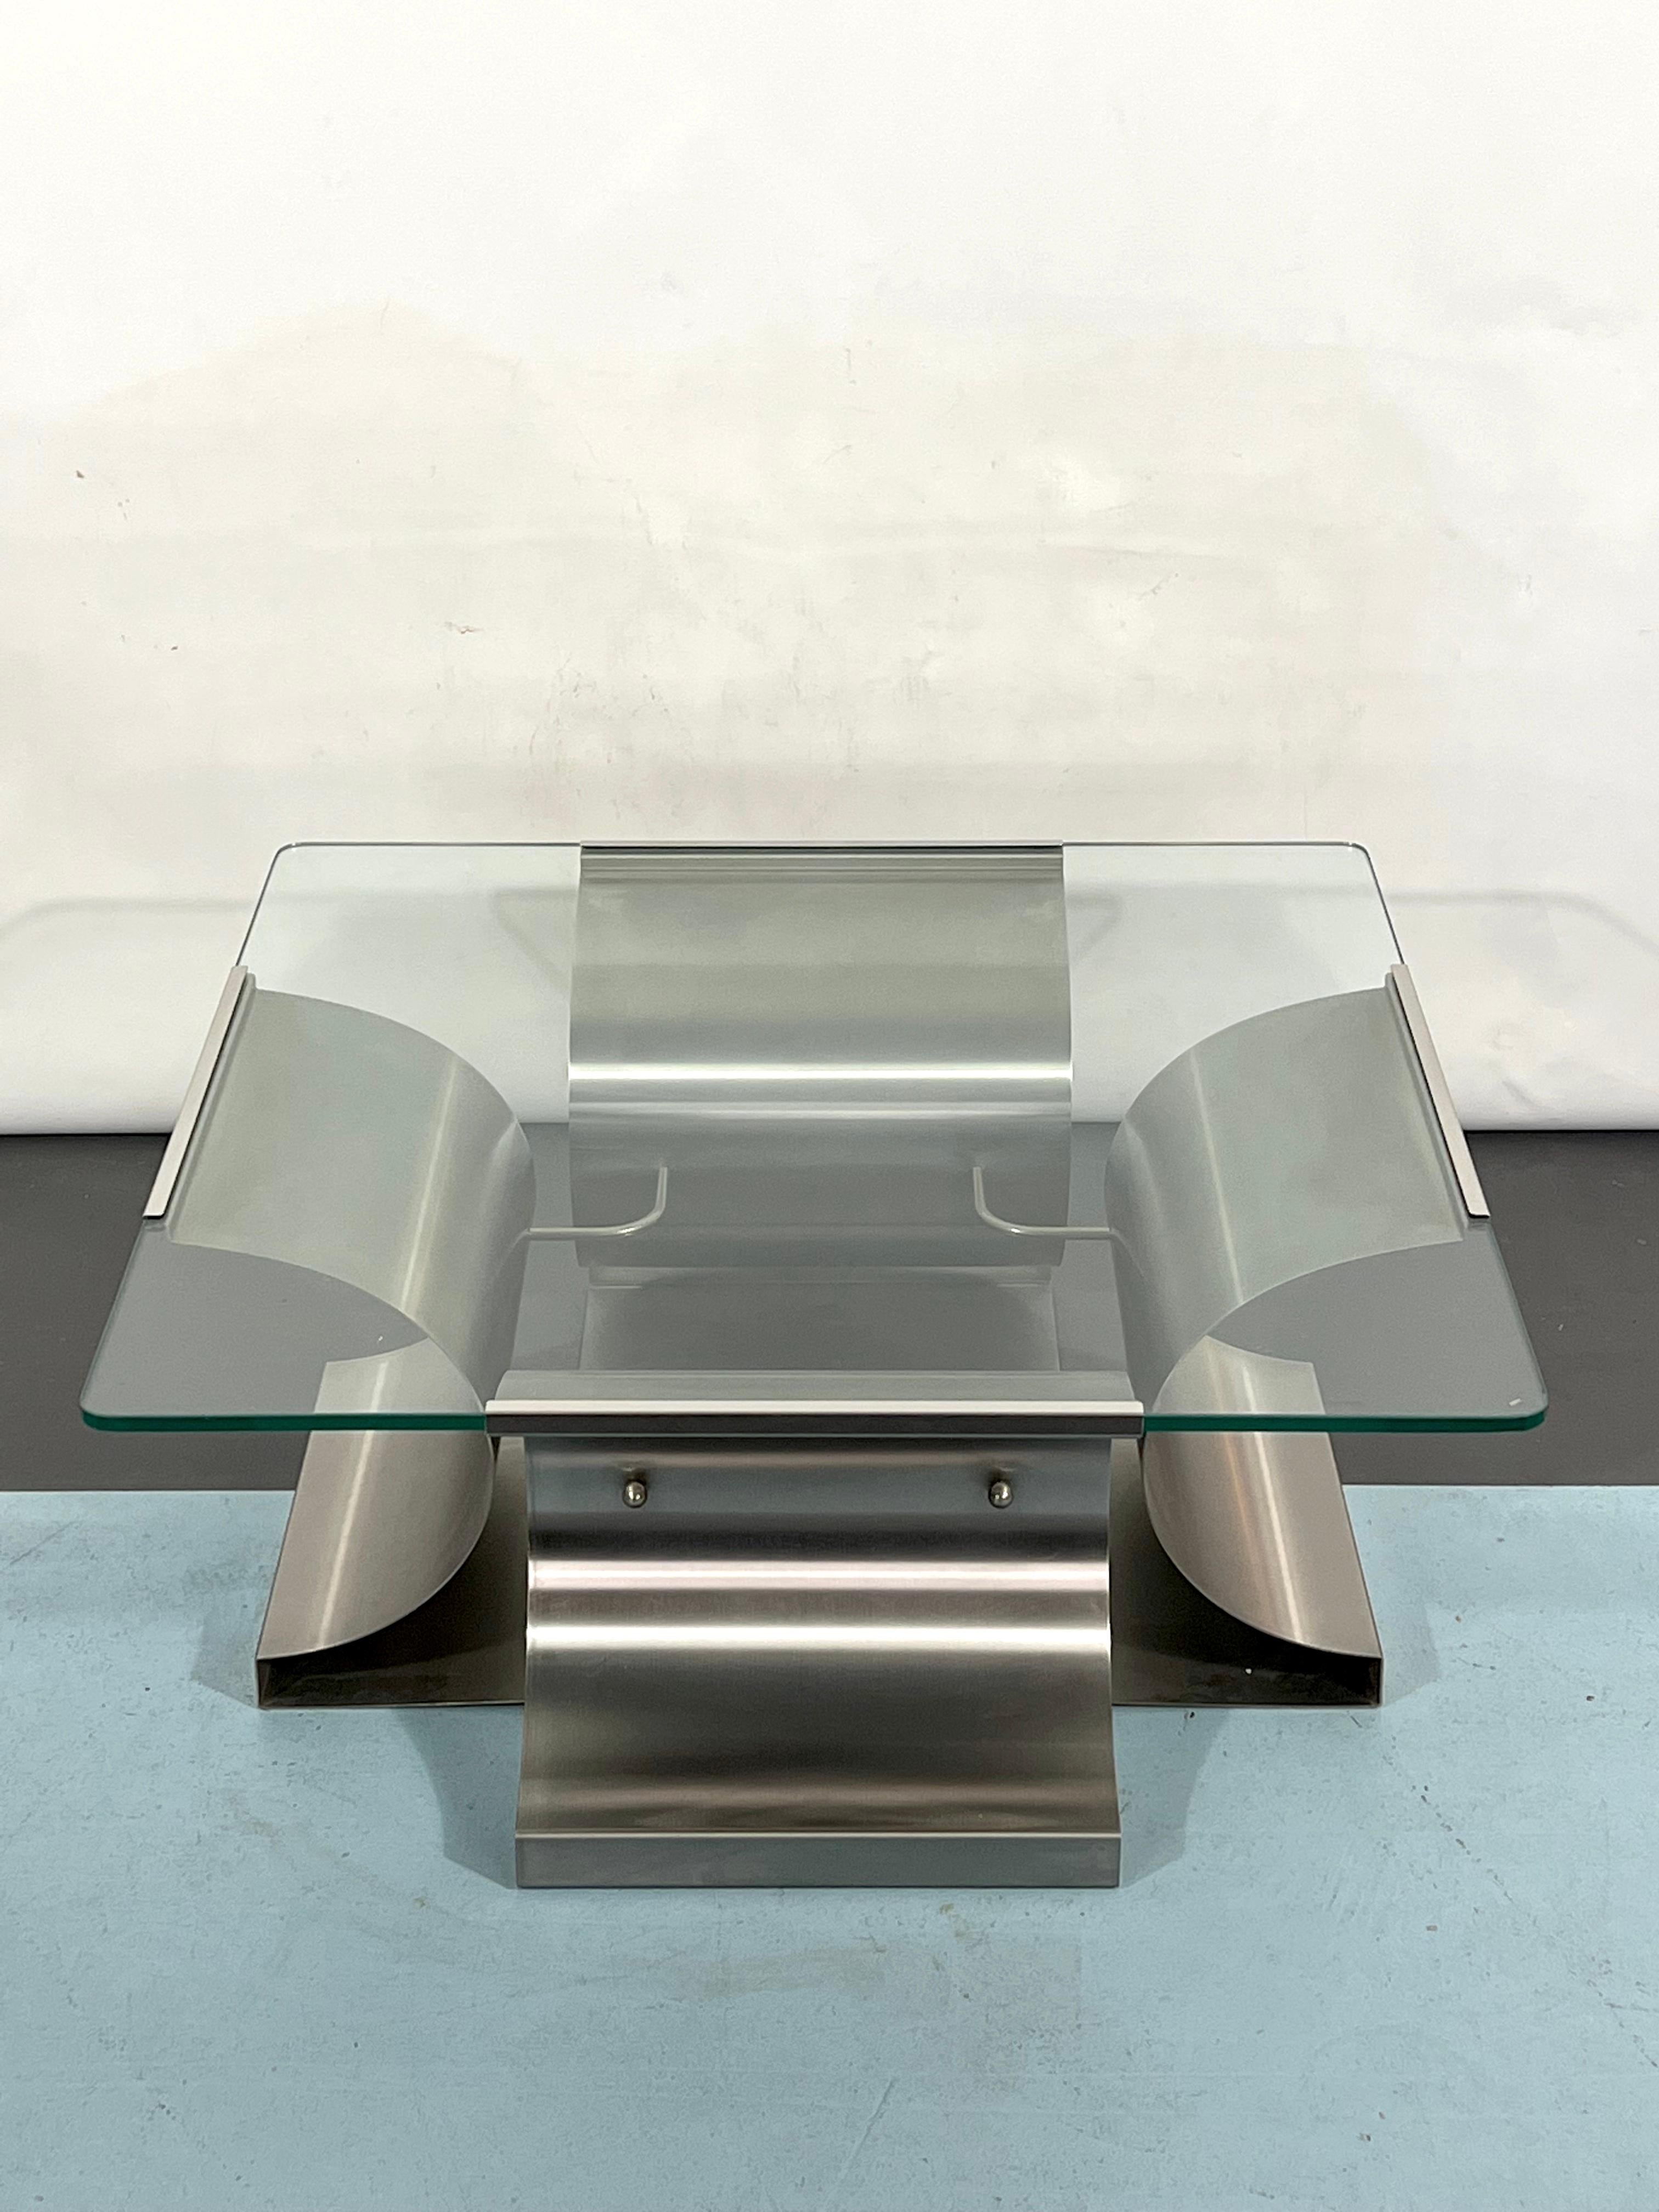 Great vintage condition with normal trace of age and use for this coffee table produced in France during the 70s and made from brushed steel and clear glass. Designed by Francois Monnet for Kappa.